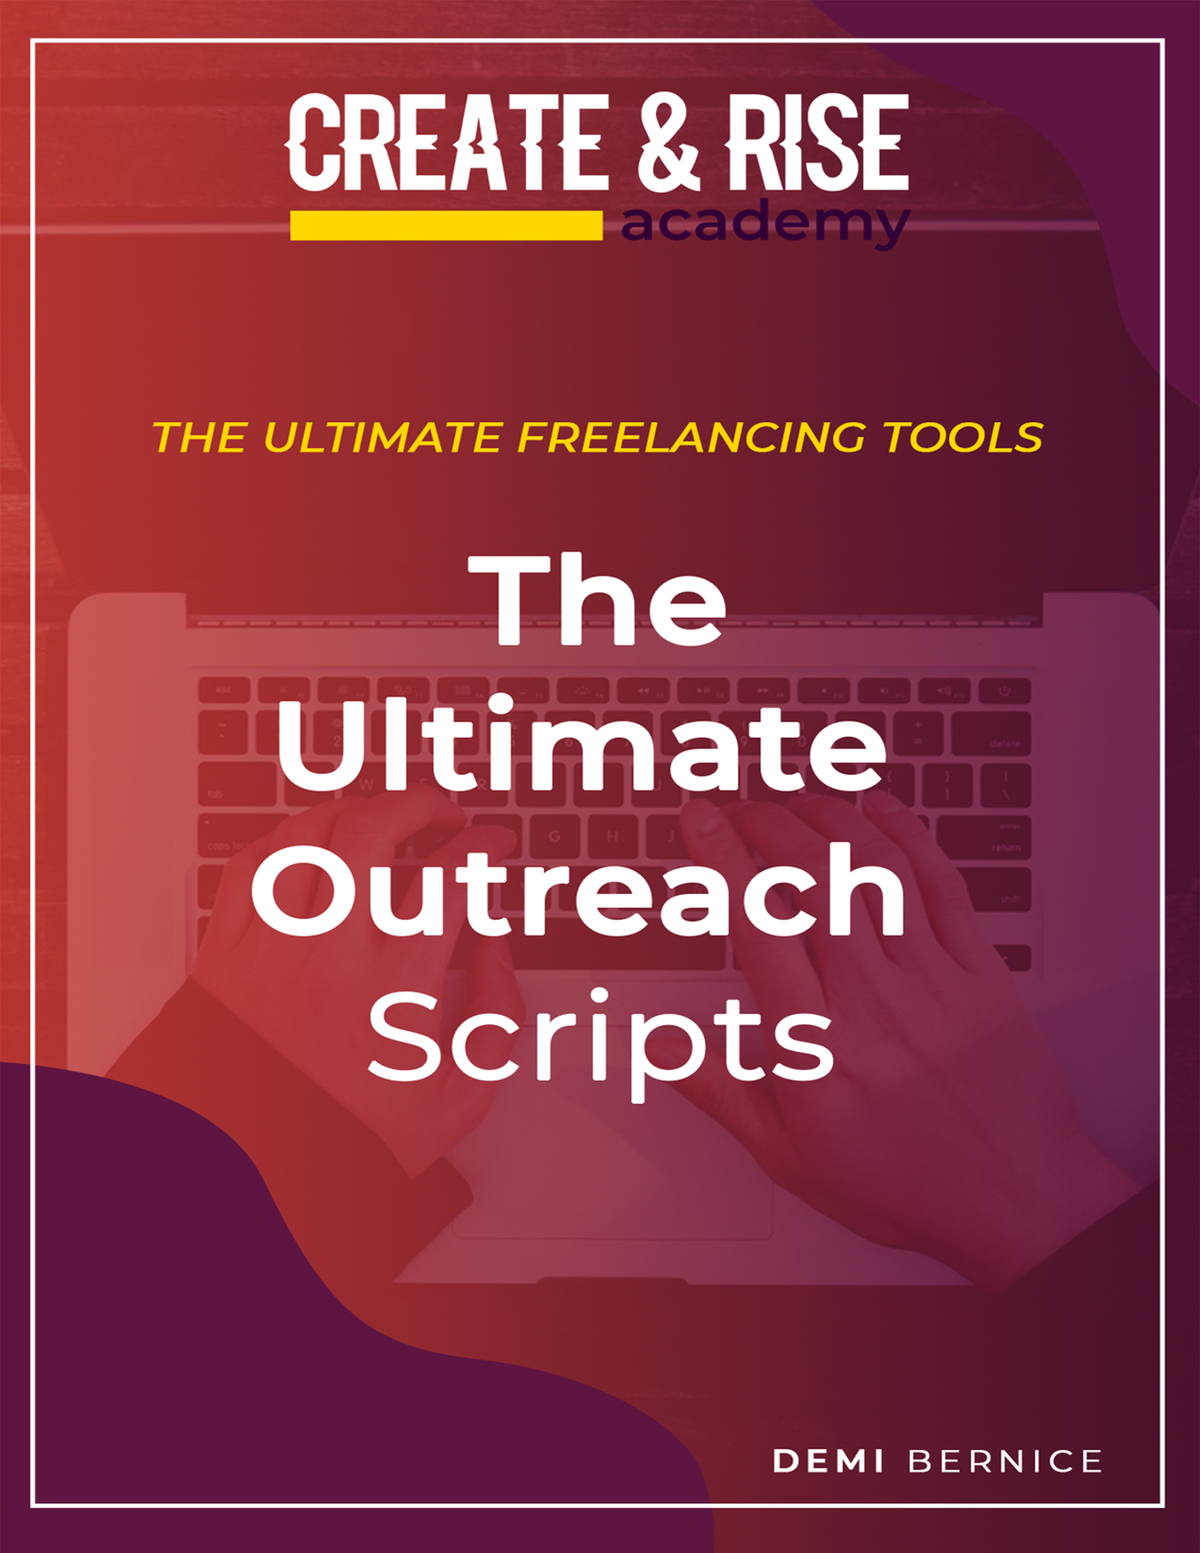 outreach-scripts-sample-output-knowing-what-to-say-on-clients-when